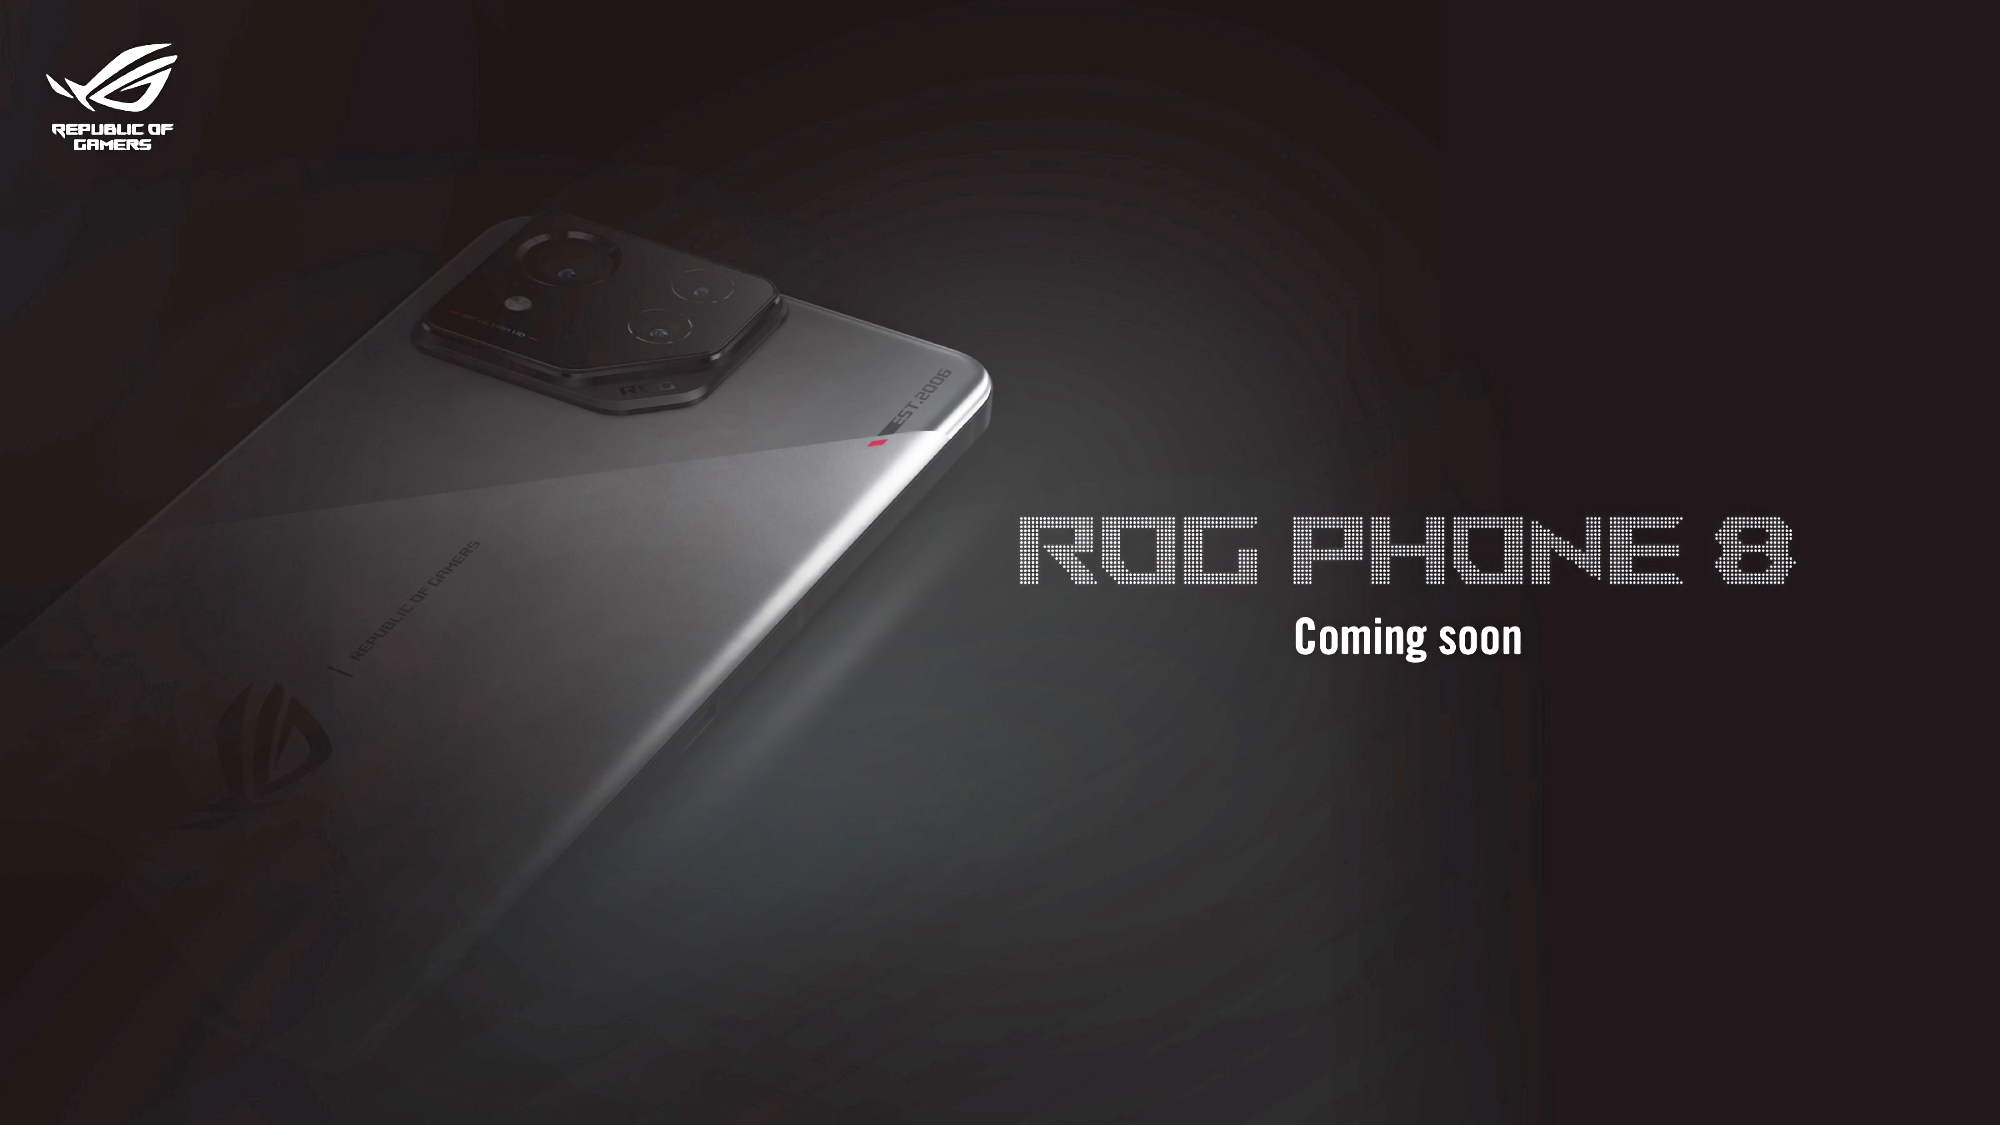 Release is just around the corner: ASUS has started teasering the ROG Phone 8 gaming smartphone